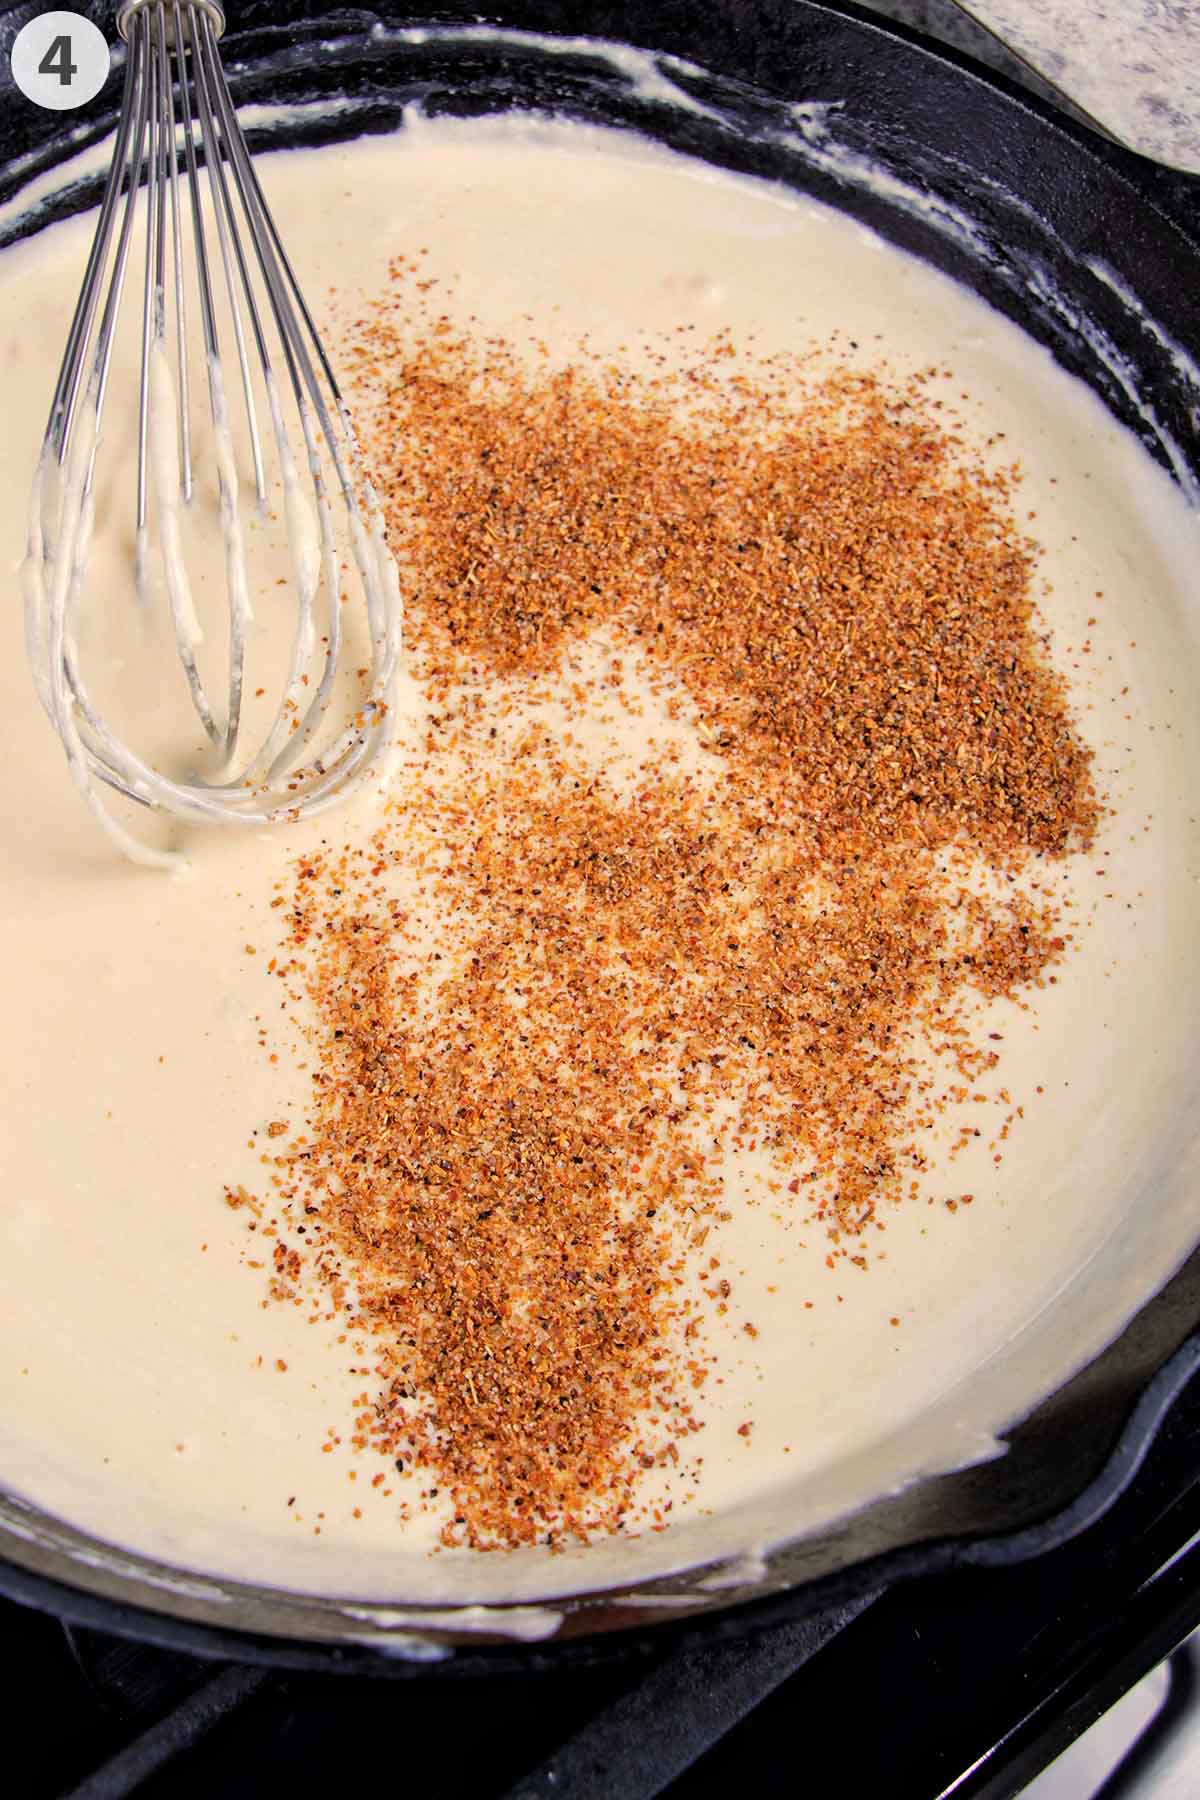 numbered photo showing how to mix tajin seasoning into queso.